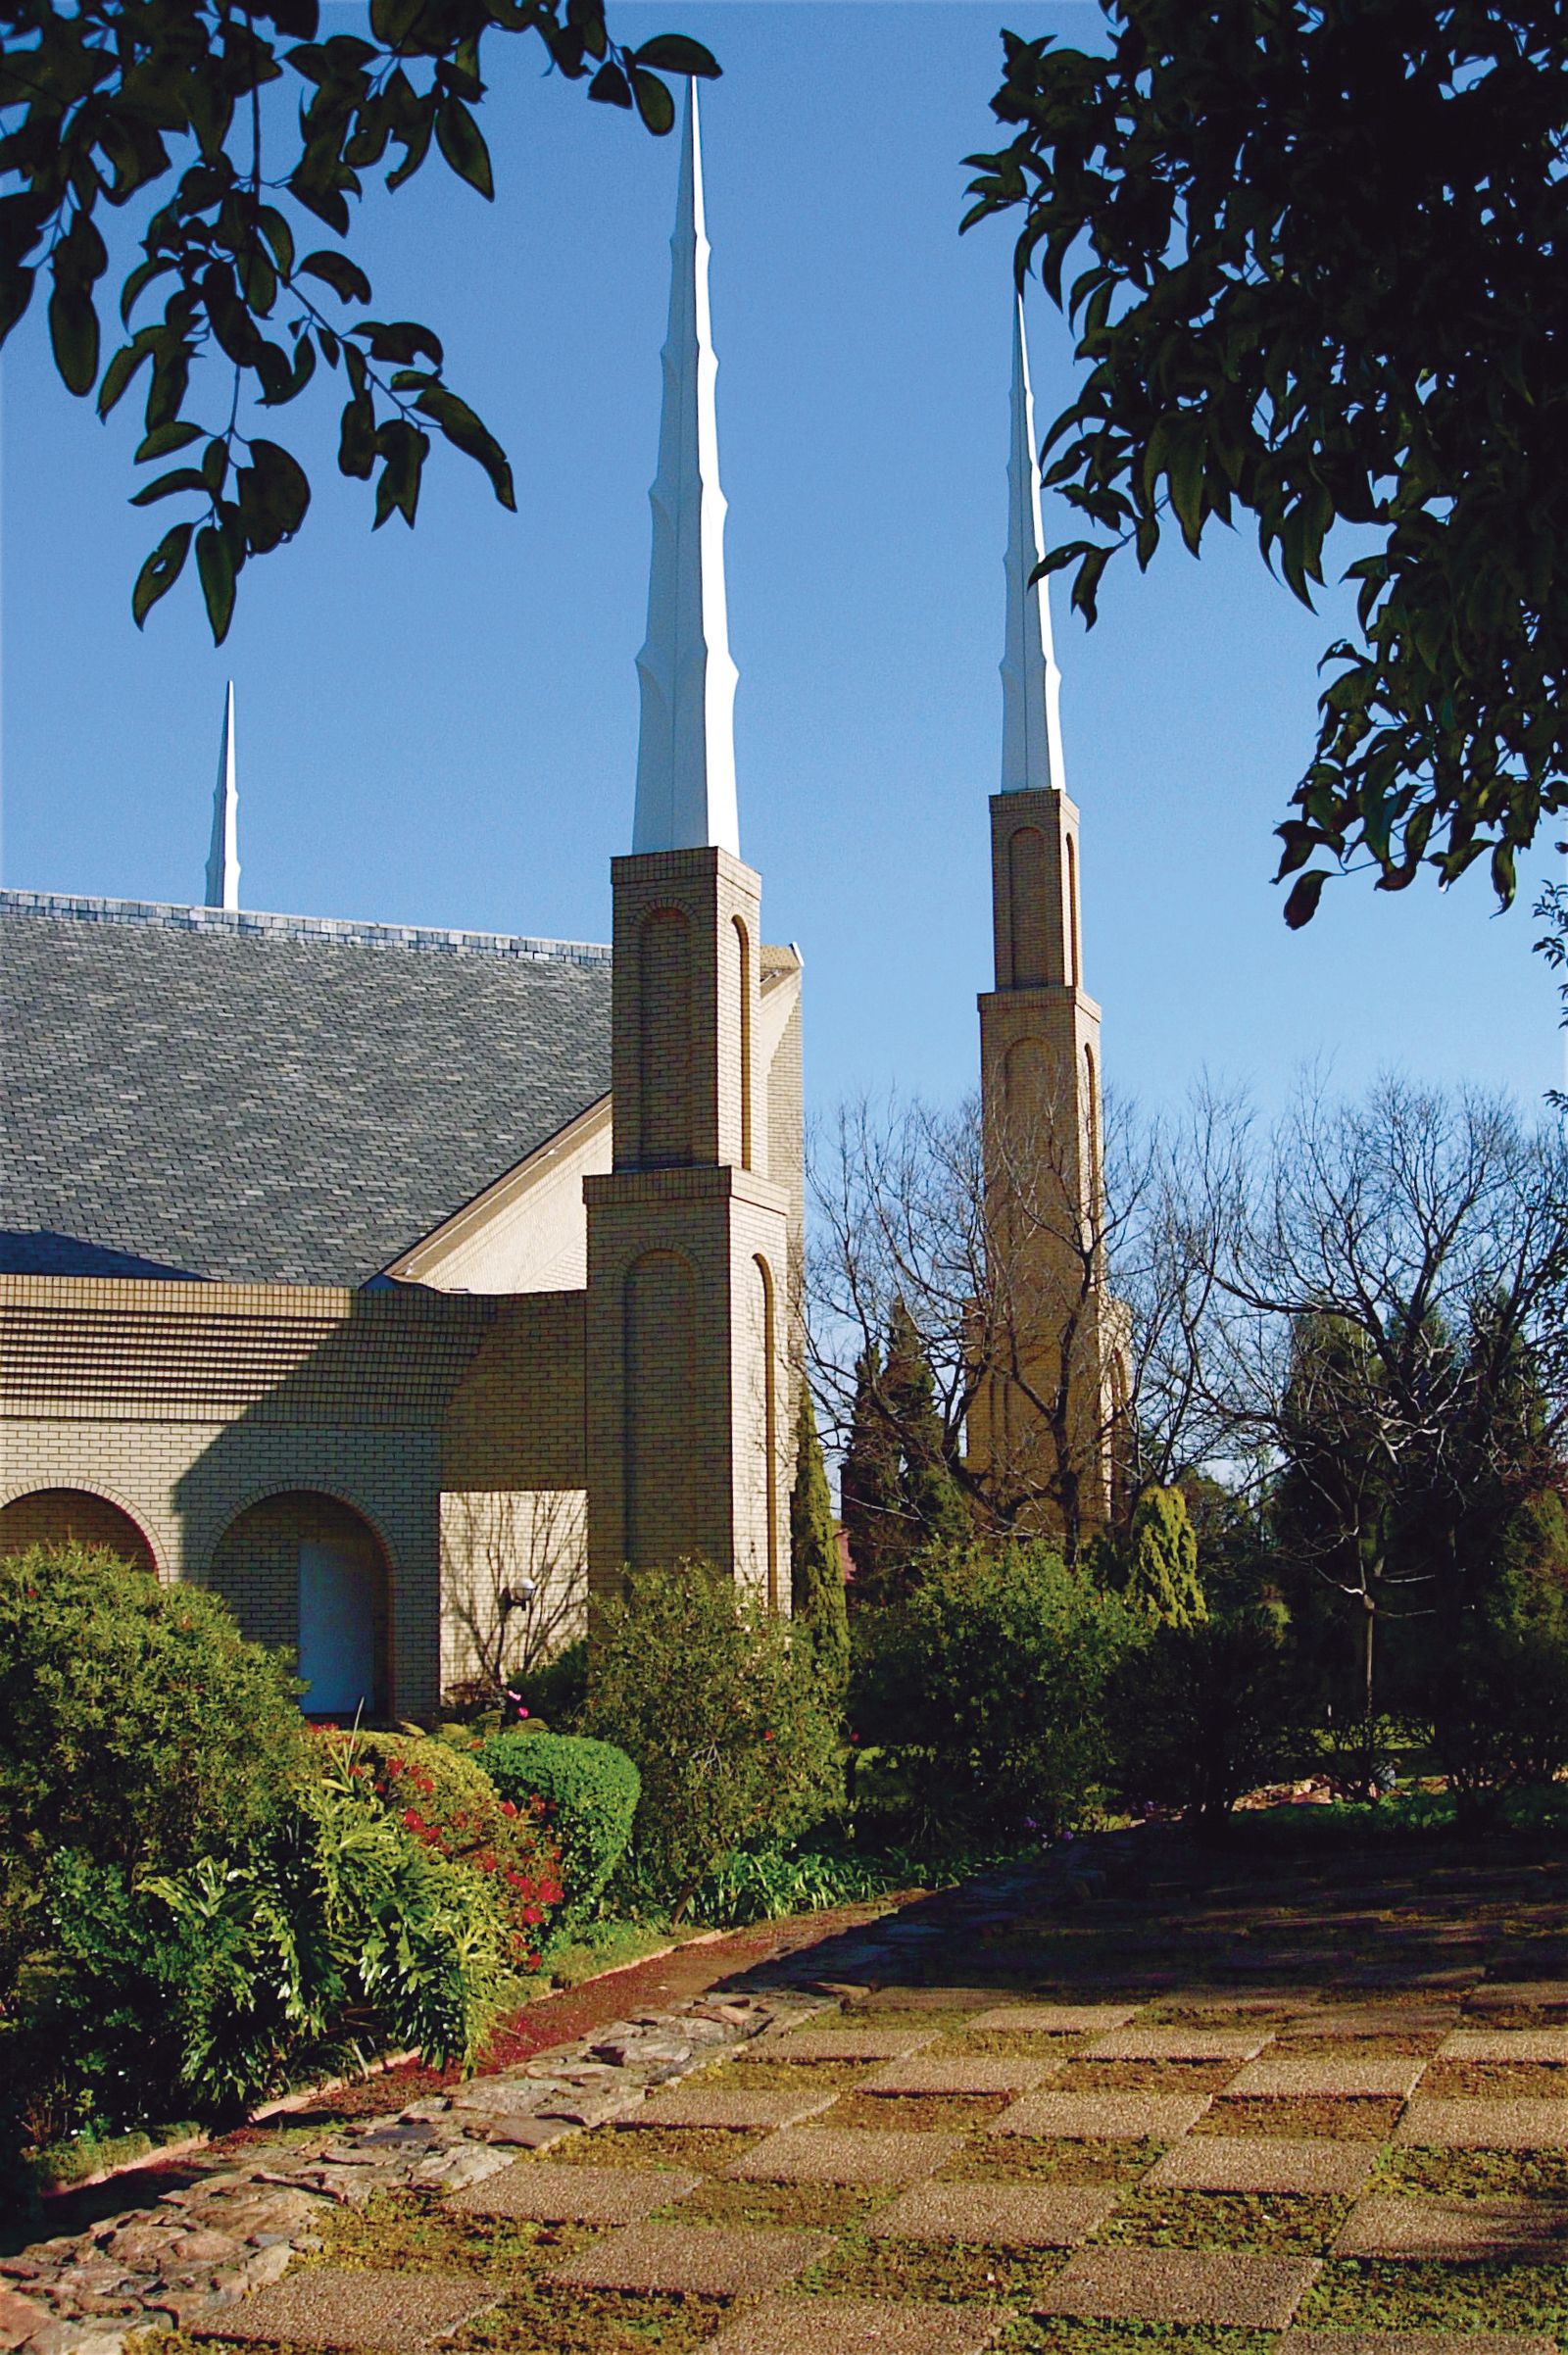 The Johannesburg South Africa Temple spires, including scenery and the exterior of the temple.